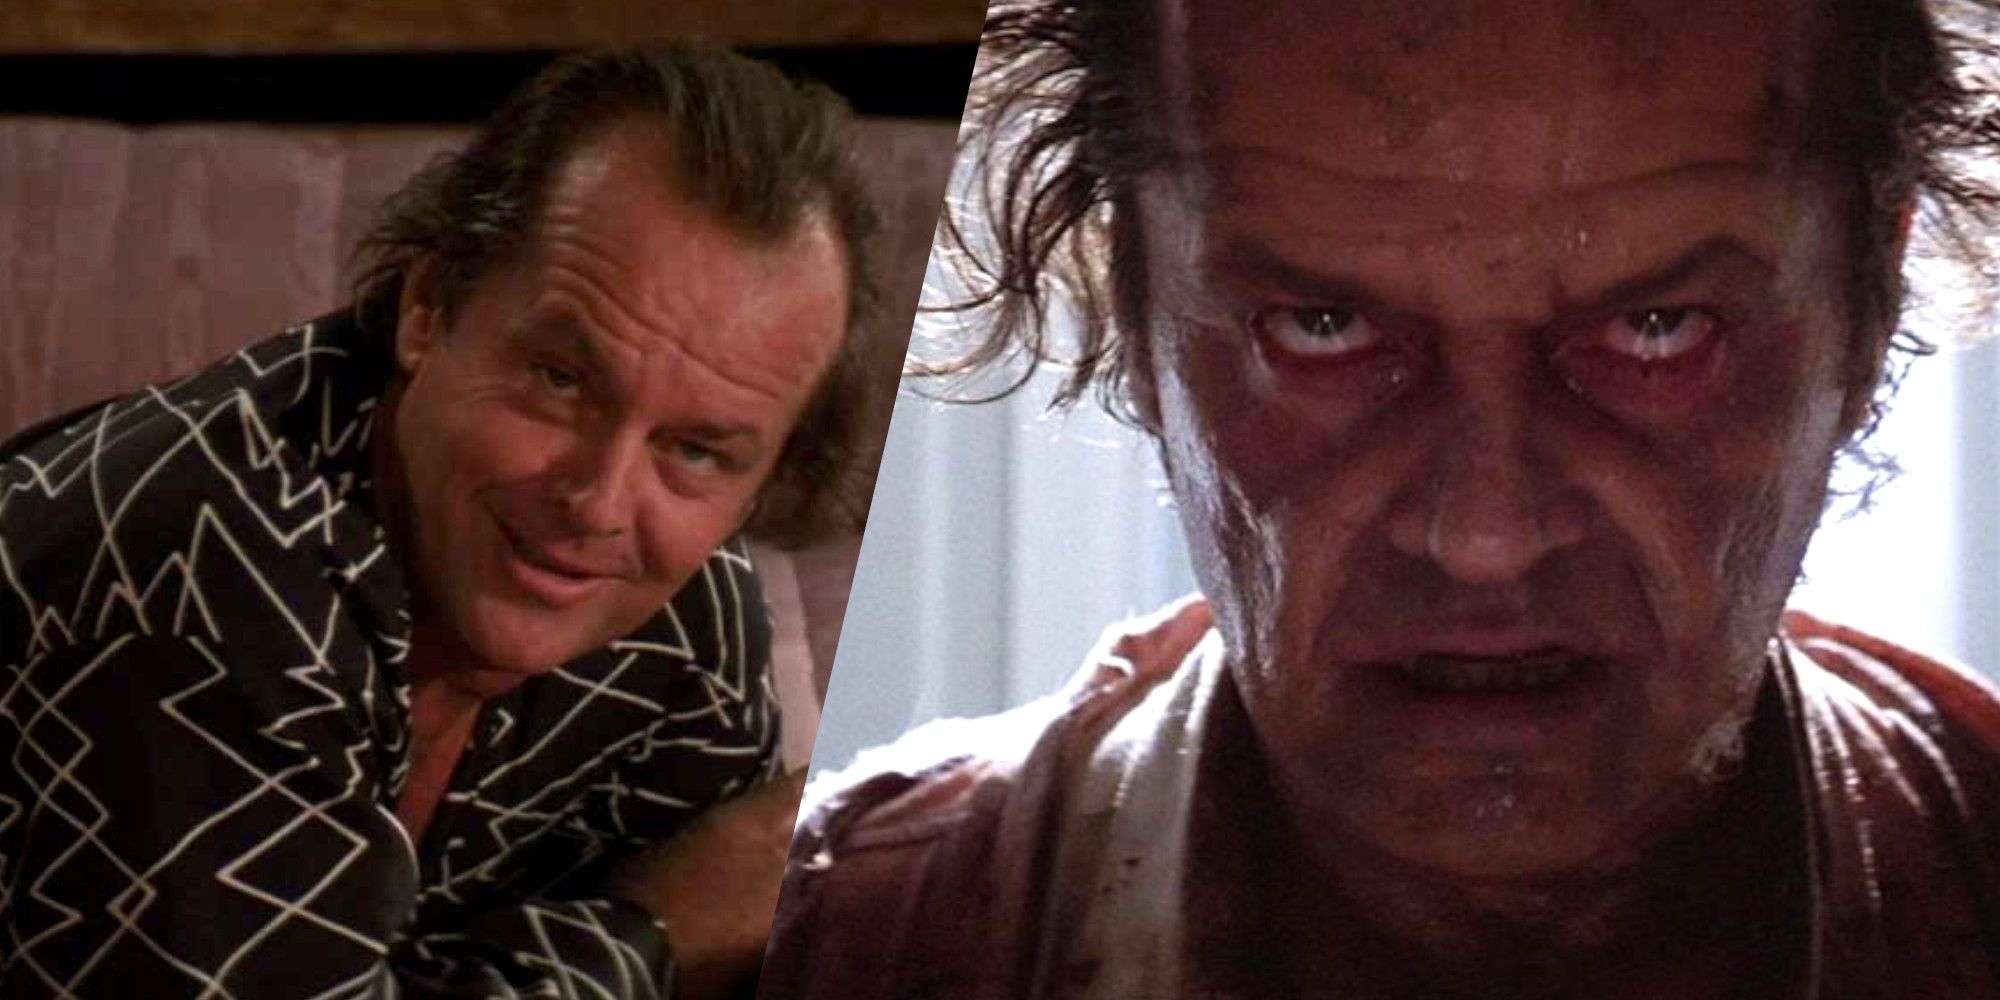 Best Lucifer Portrayals Jack Nicholson in The Witches of Eastwick 1980s dark comedy